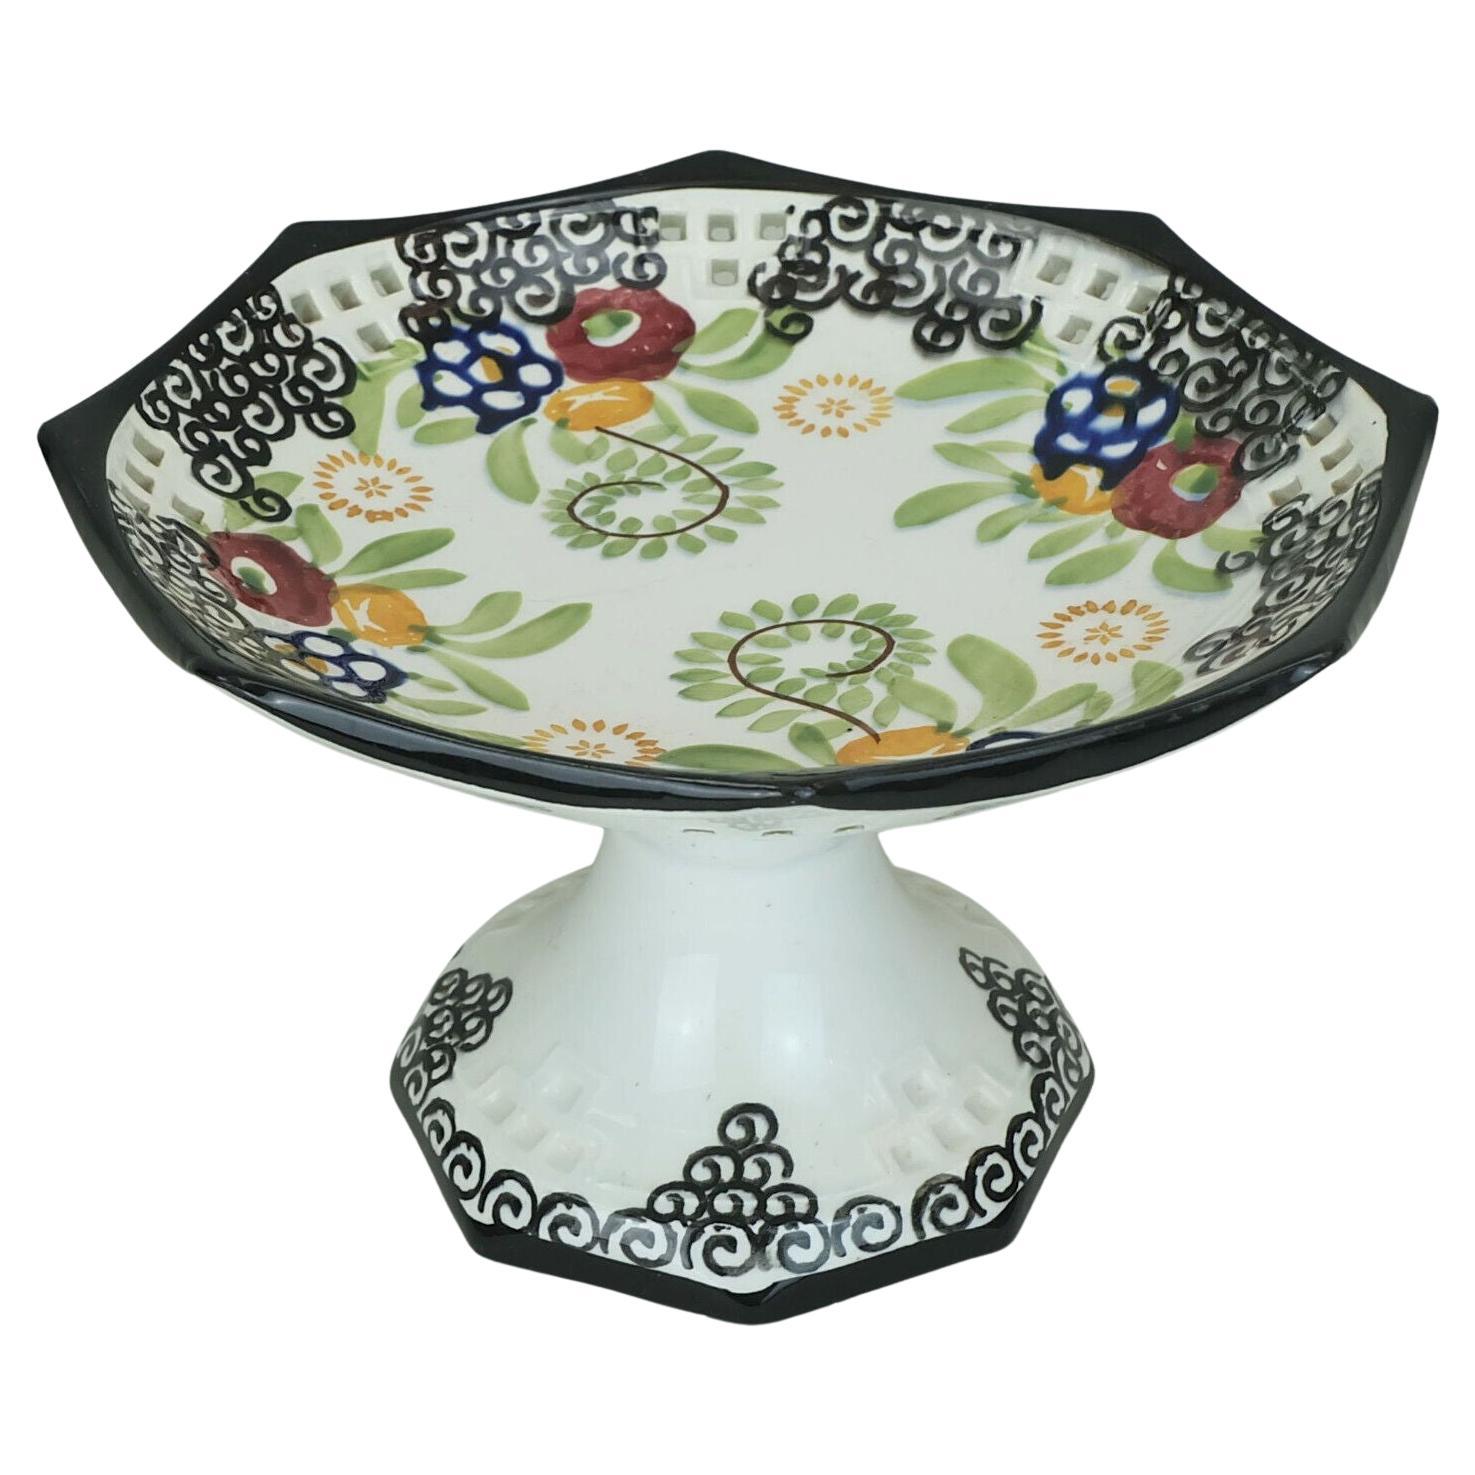 octagonal art deco BOWL footed bowl schramberg majolika 1920s hand-painted decor For Sale